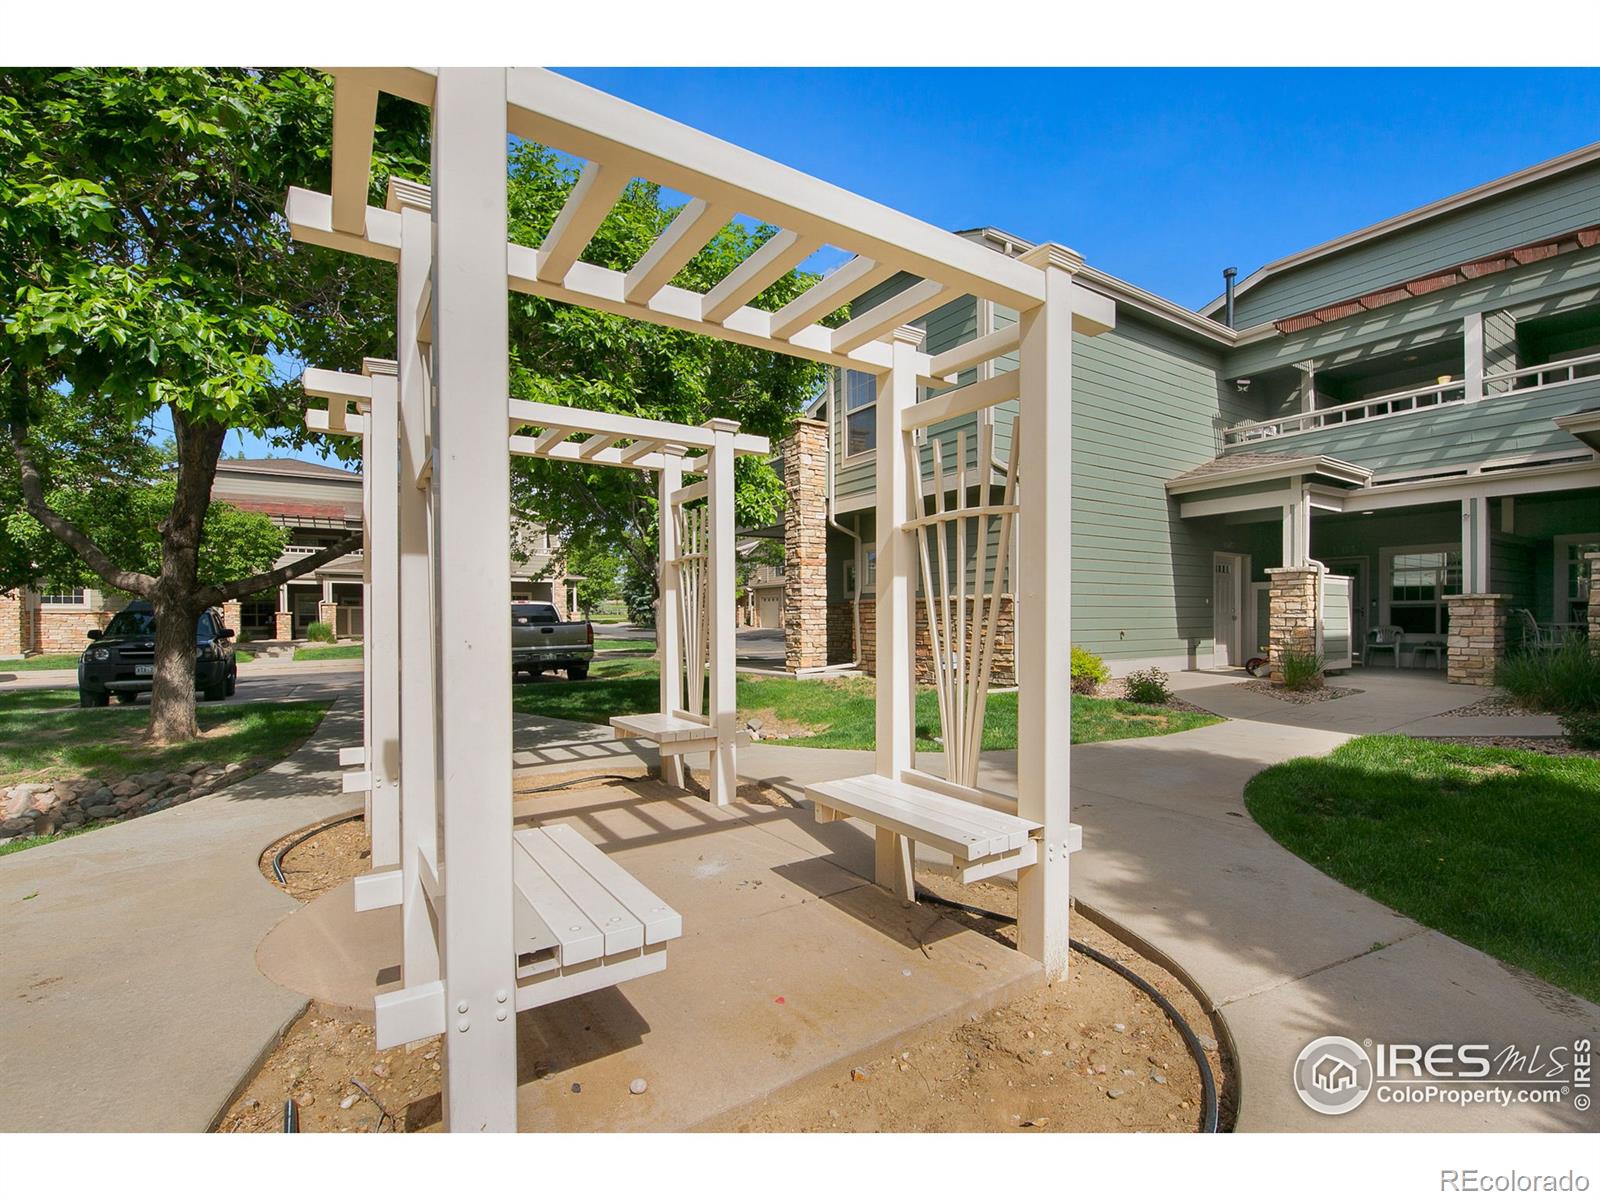 5775 29th, Greeley, CO